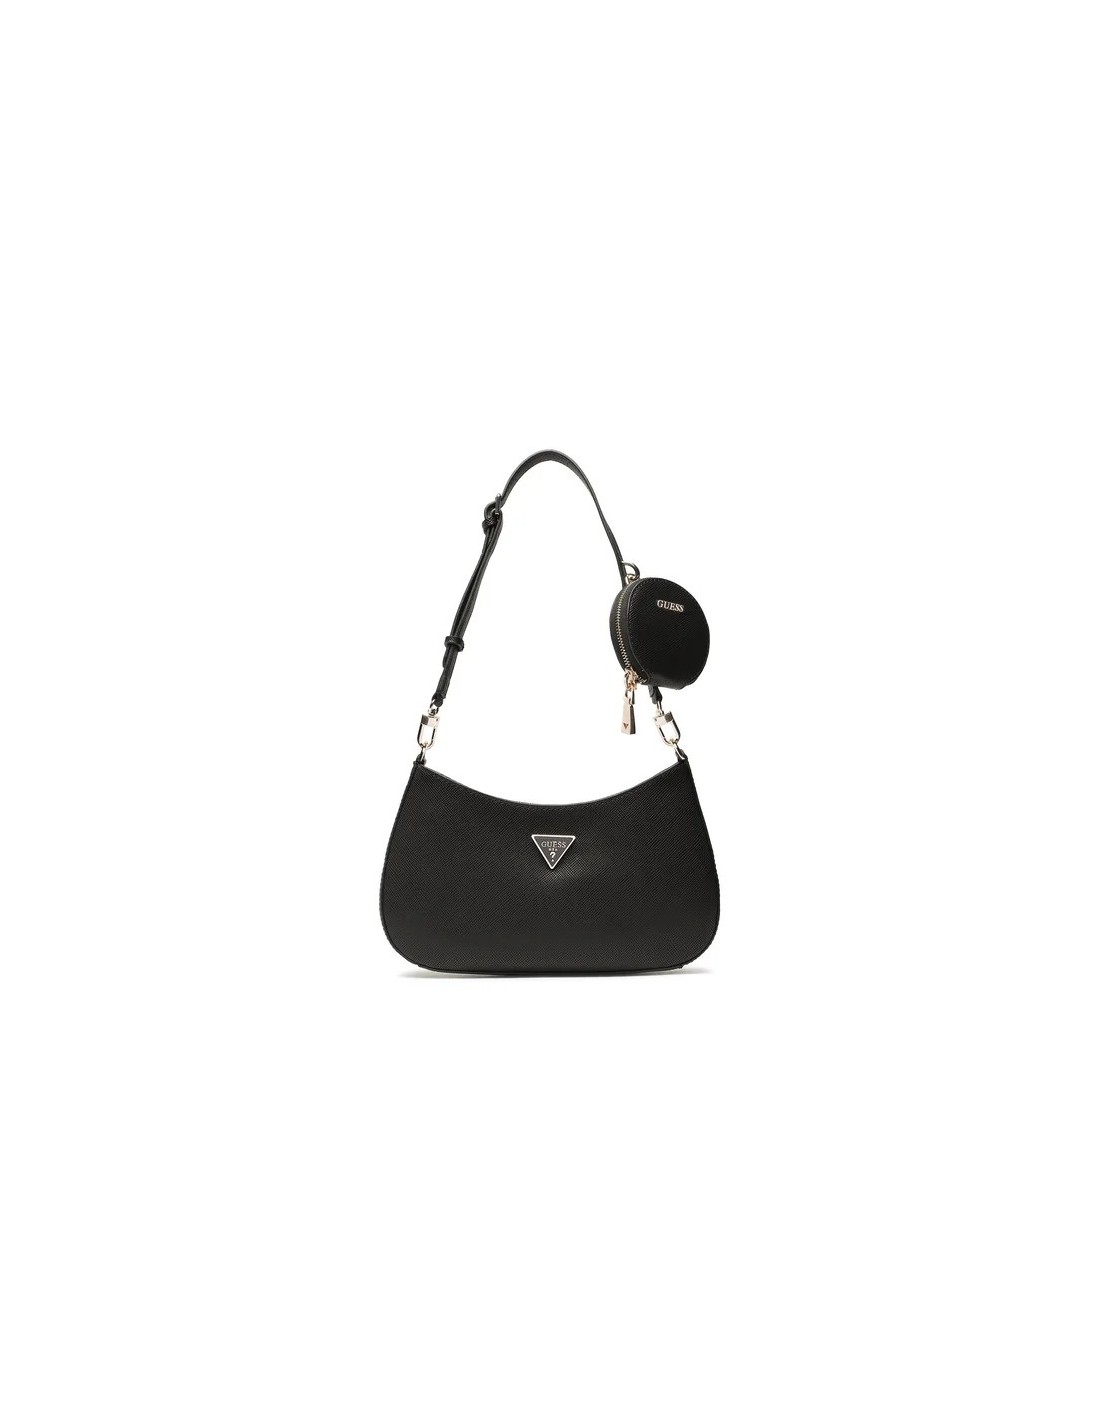 BOLSO GUESS ALEXIE NEGRO